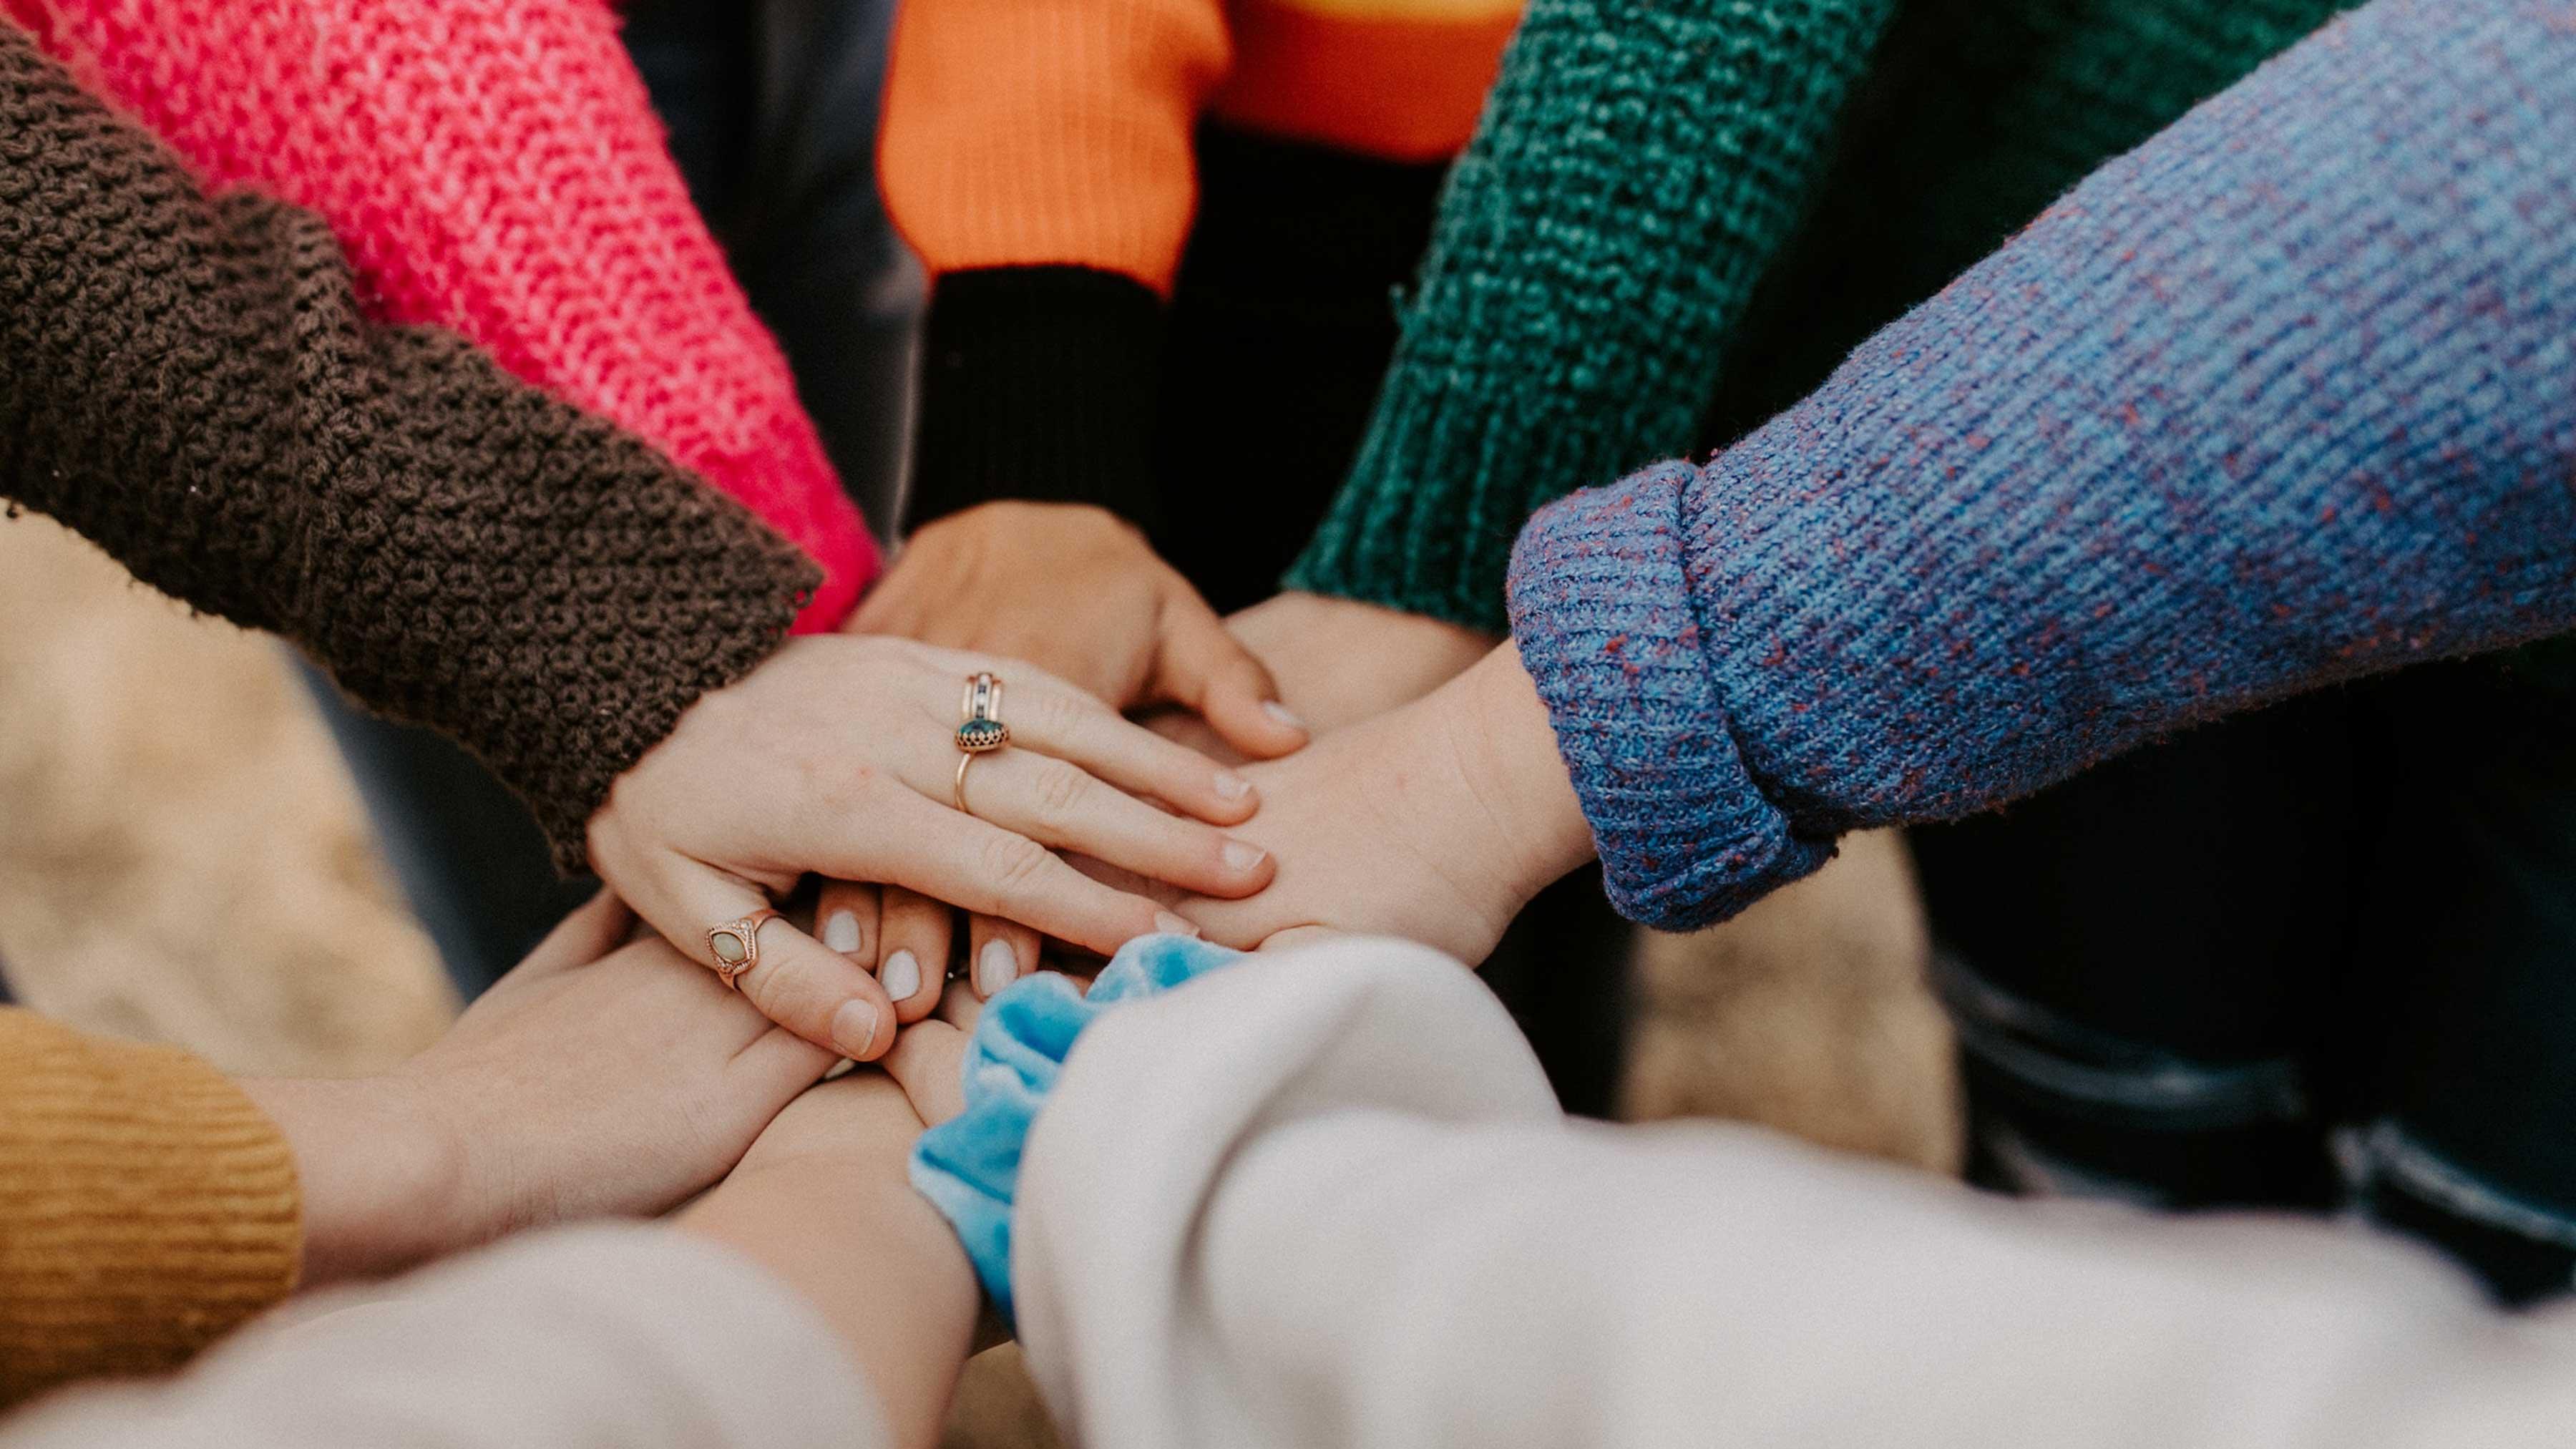 A close-up of many students' hands coming together in a circle. Each student is wearing a different colour of sweater.